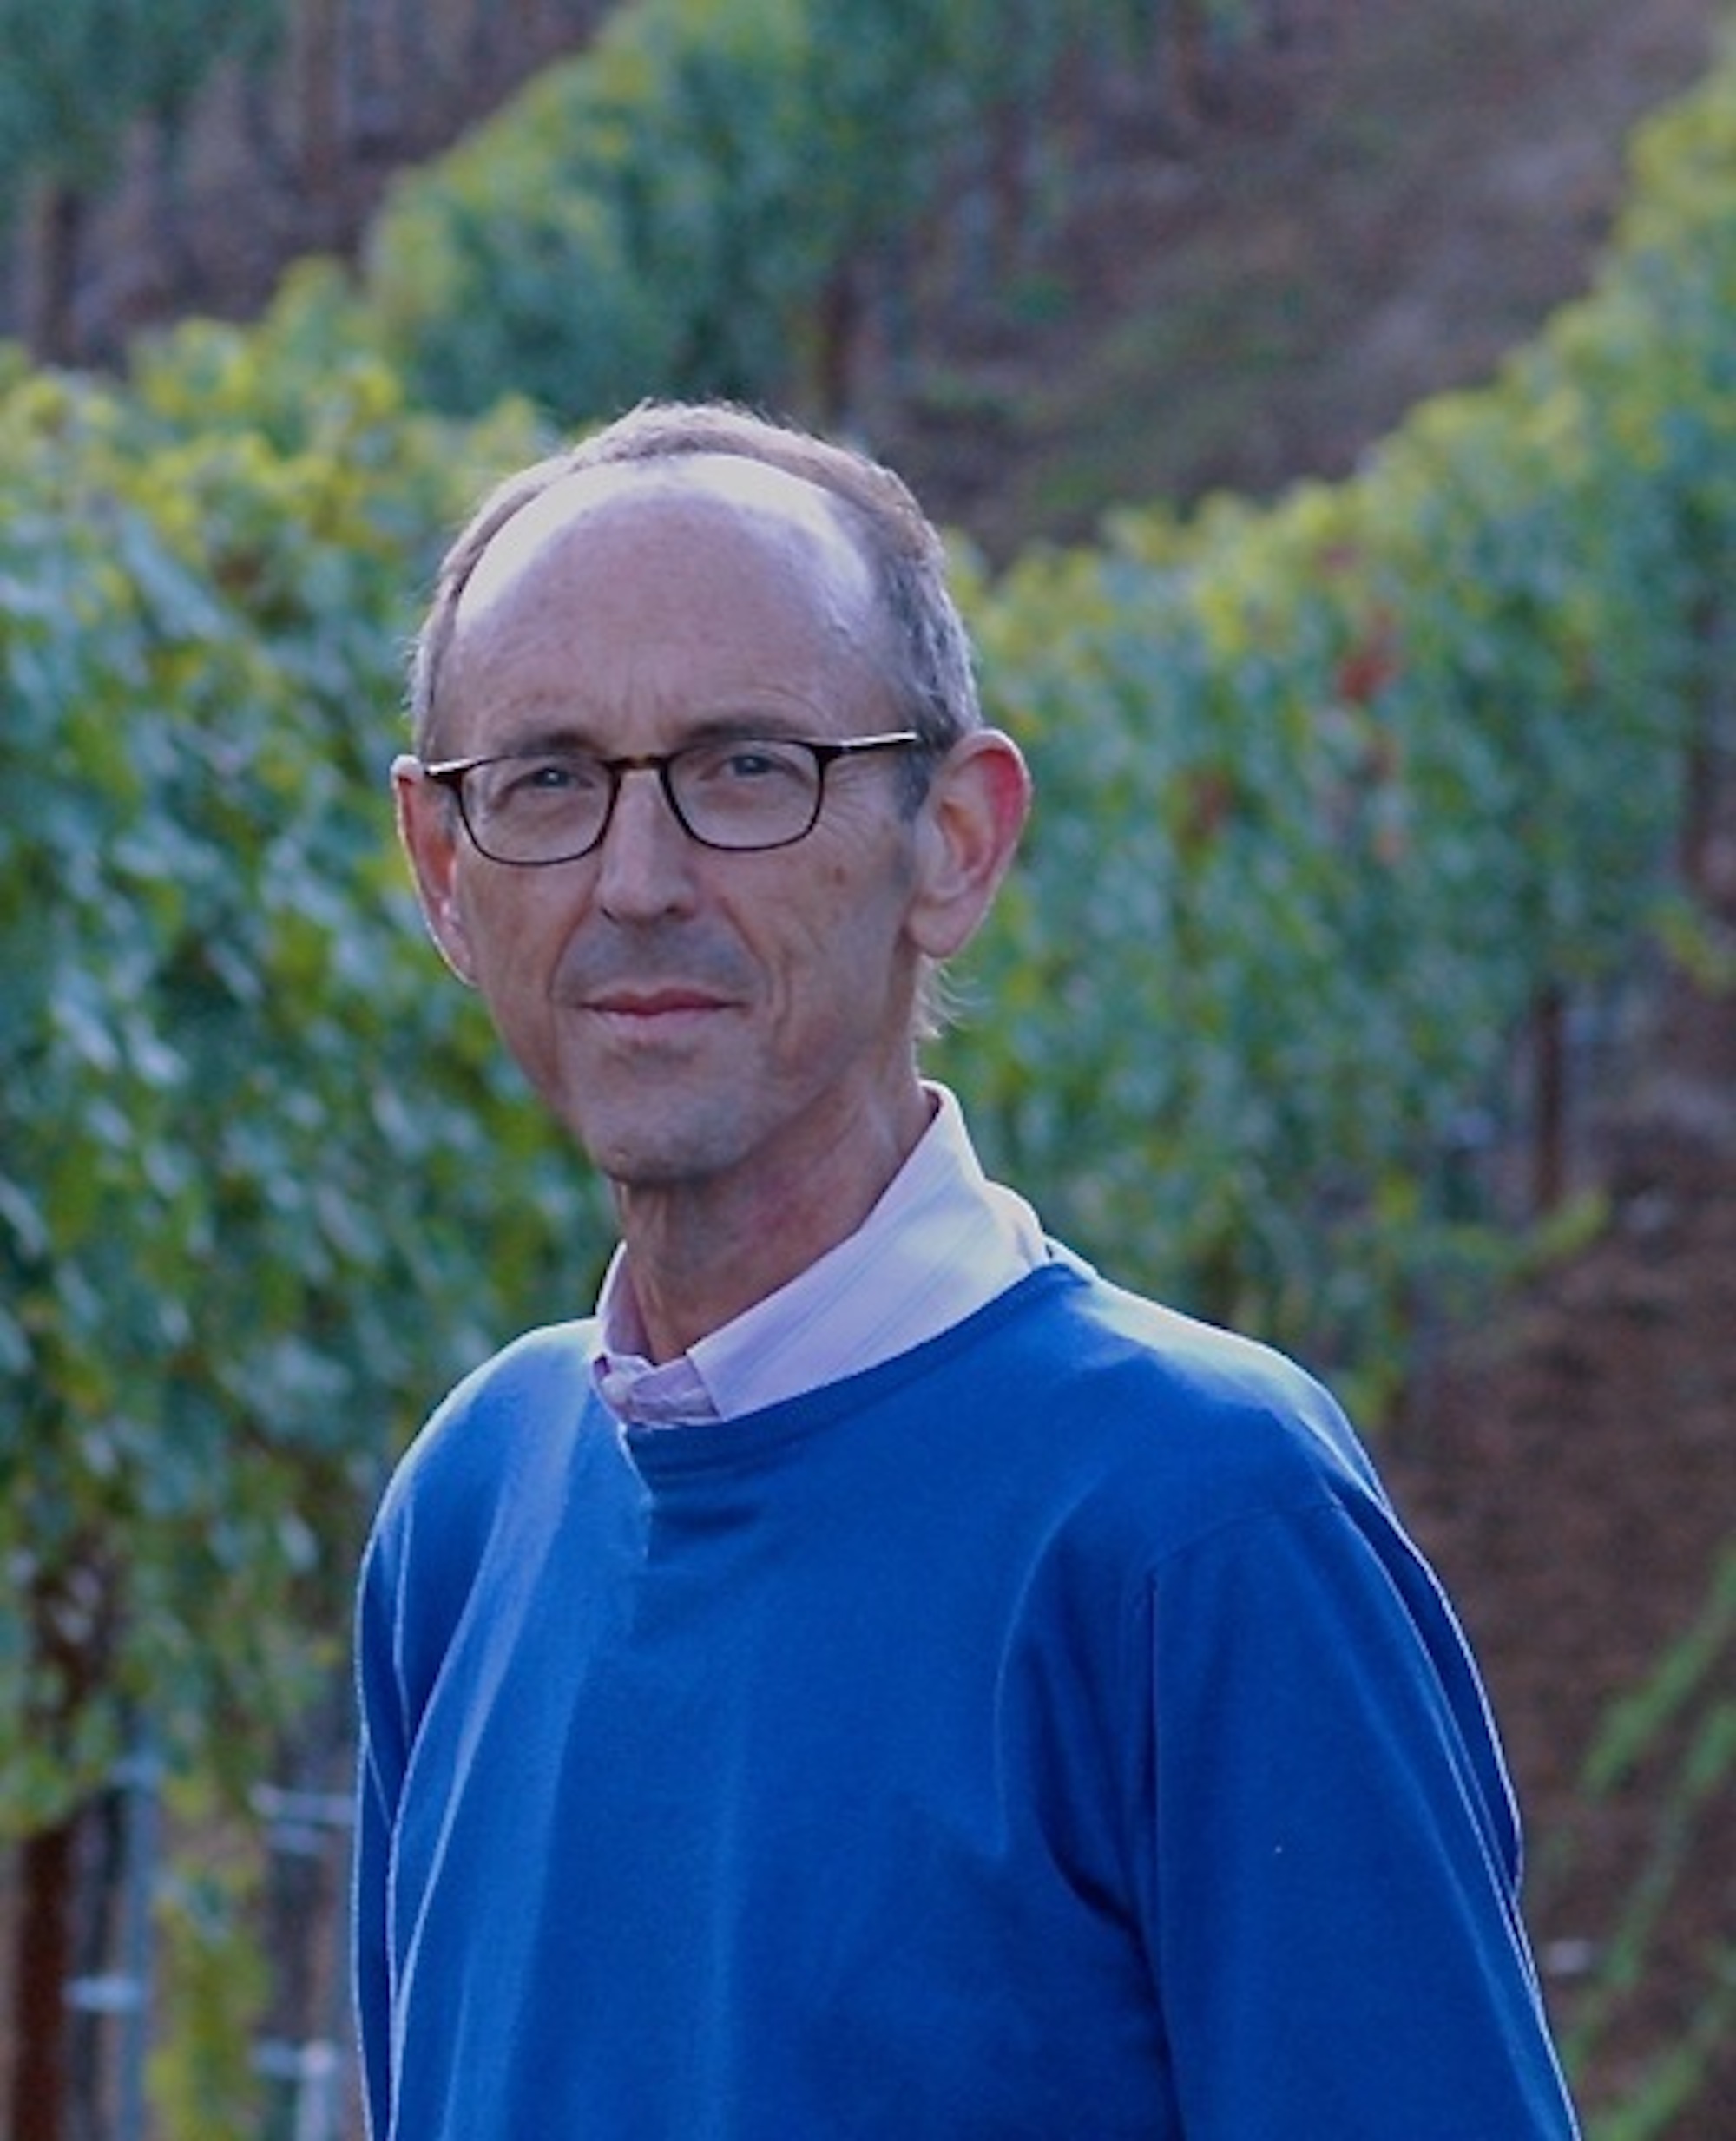 man wearing glasses with vineyard background